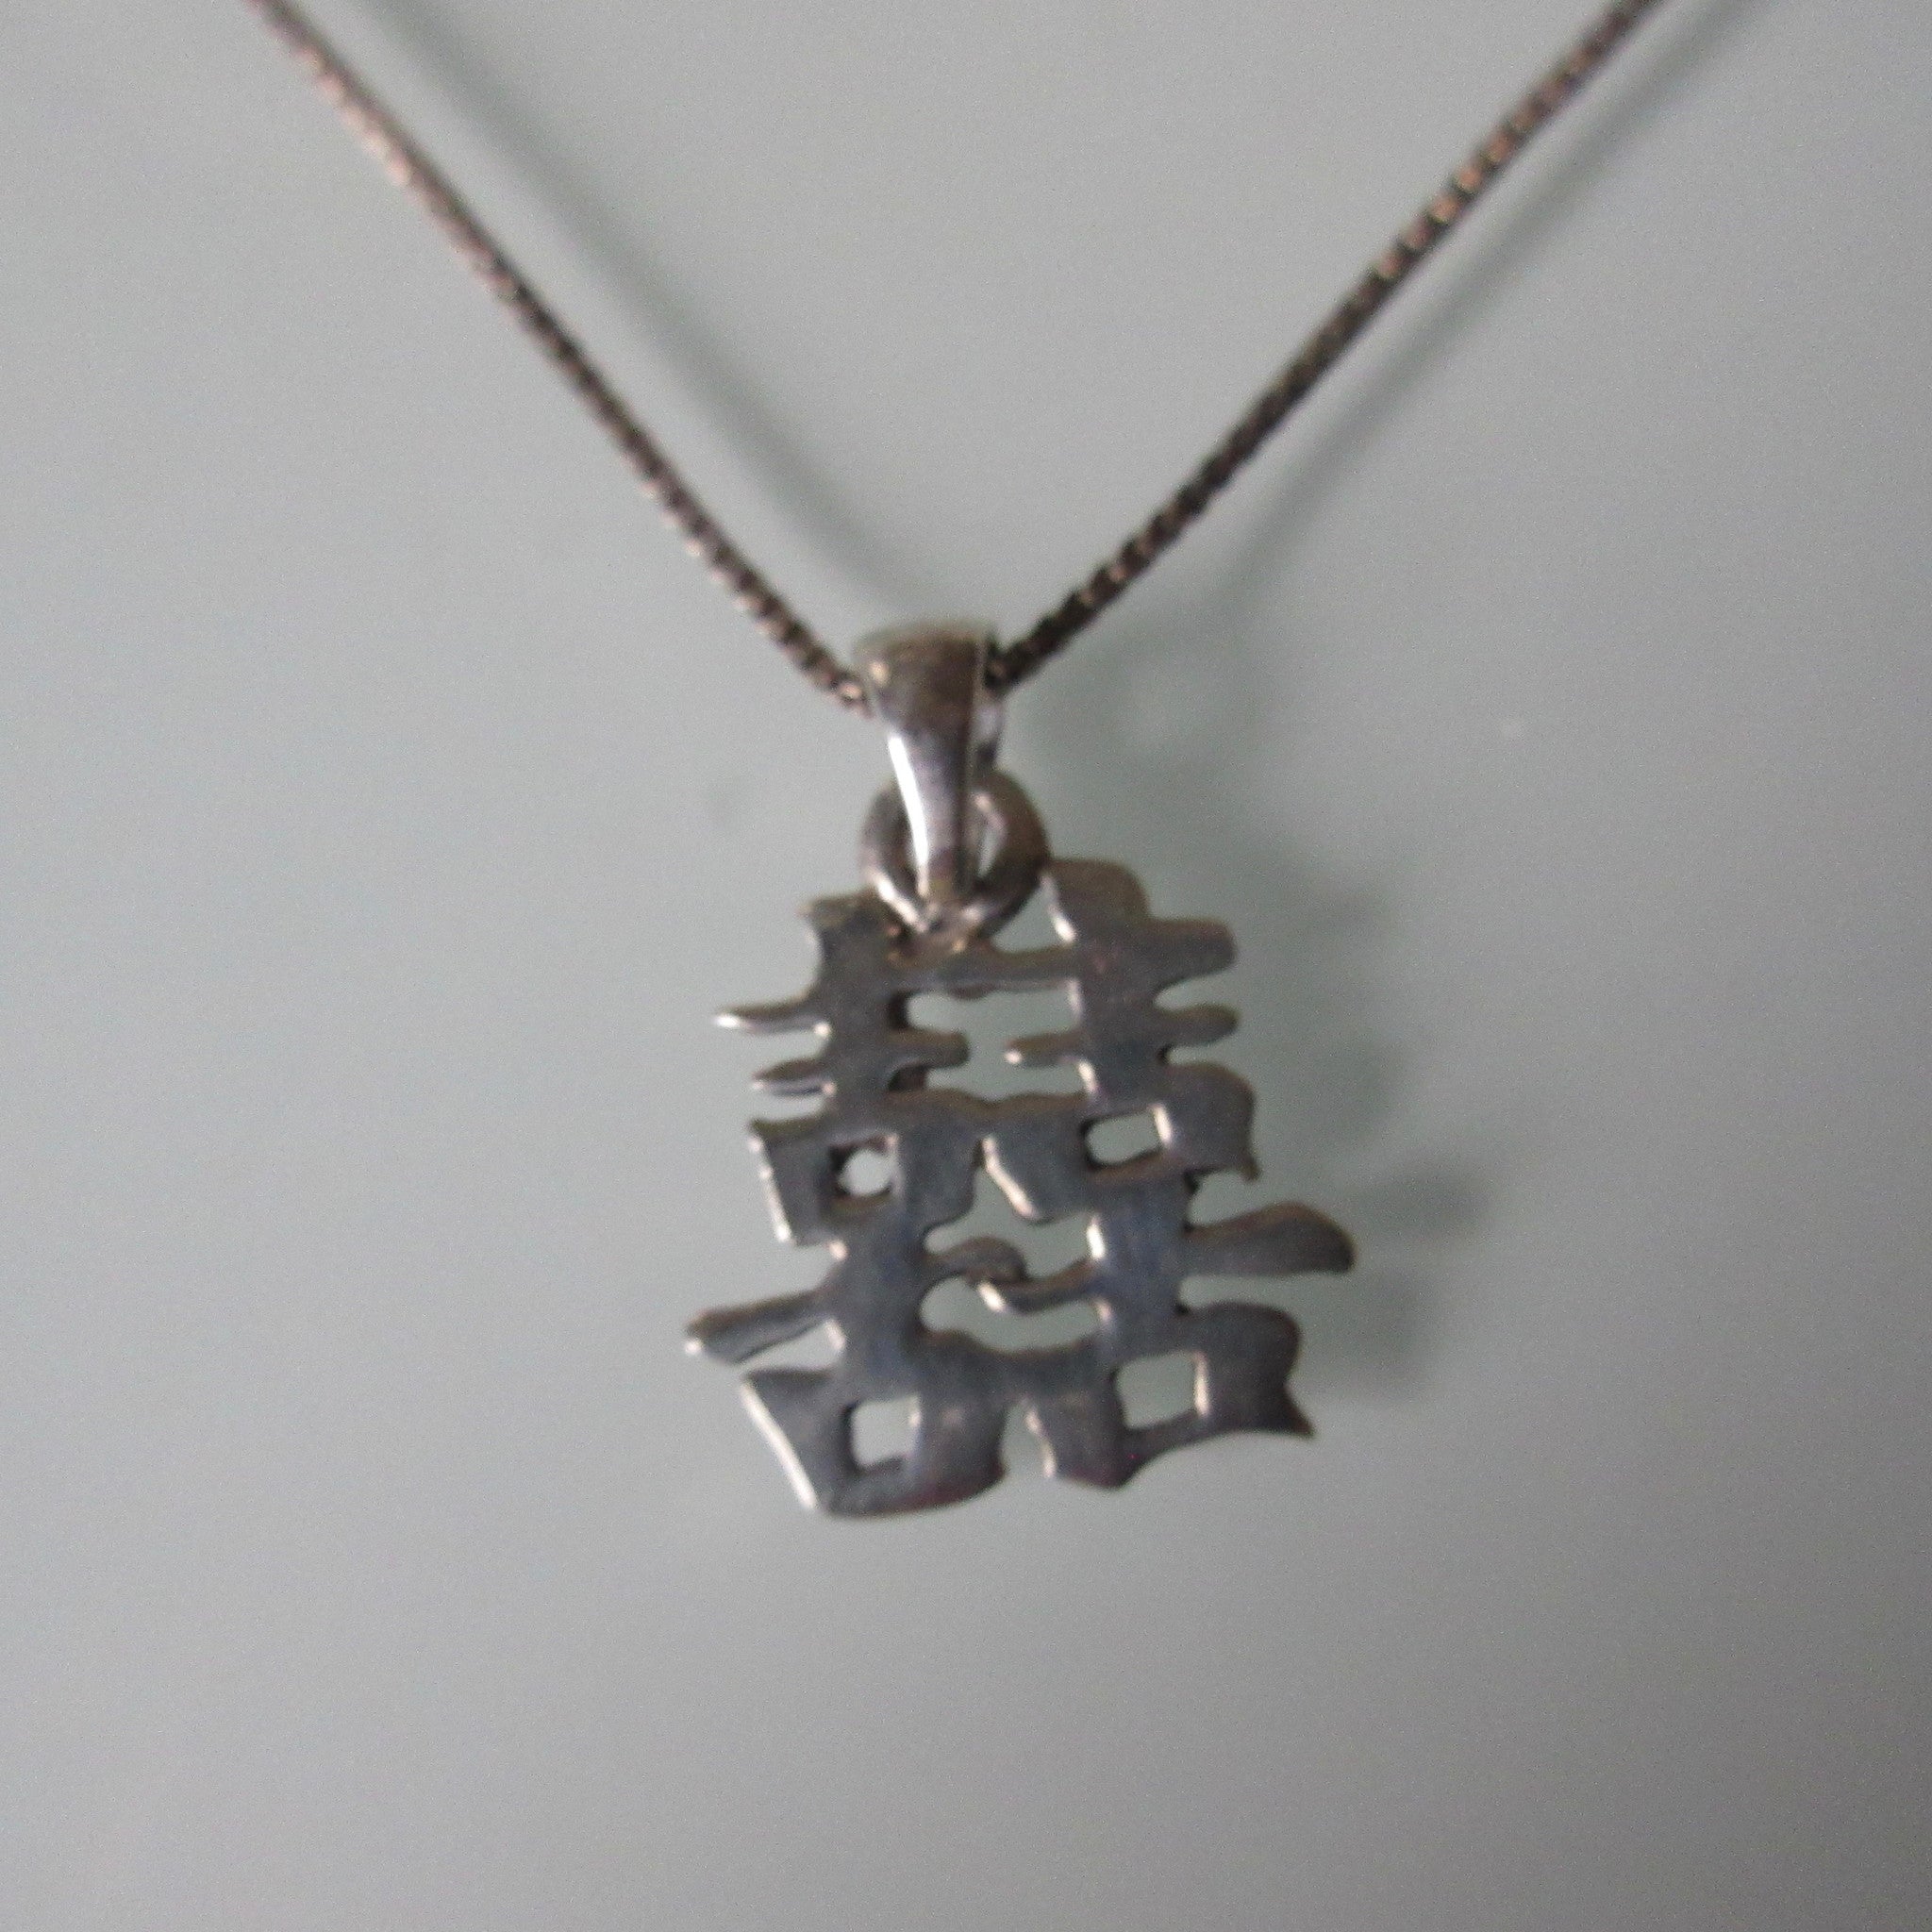 Chinese Double Happiness Pendant on Sterling Silver Chain 16"